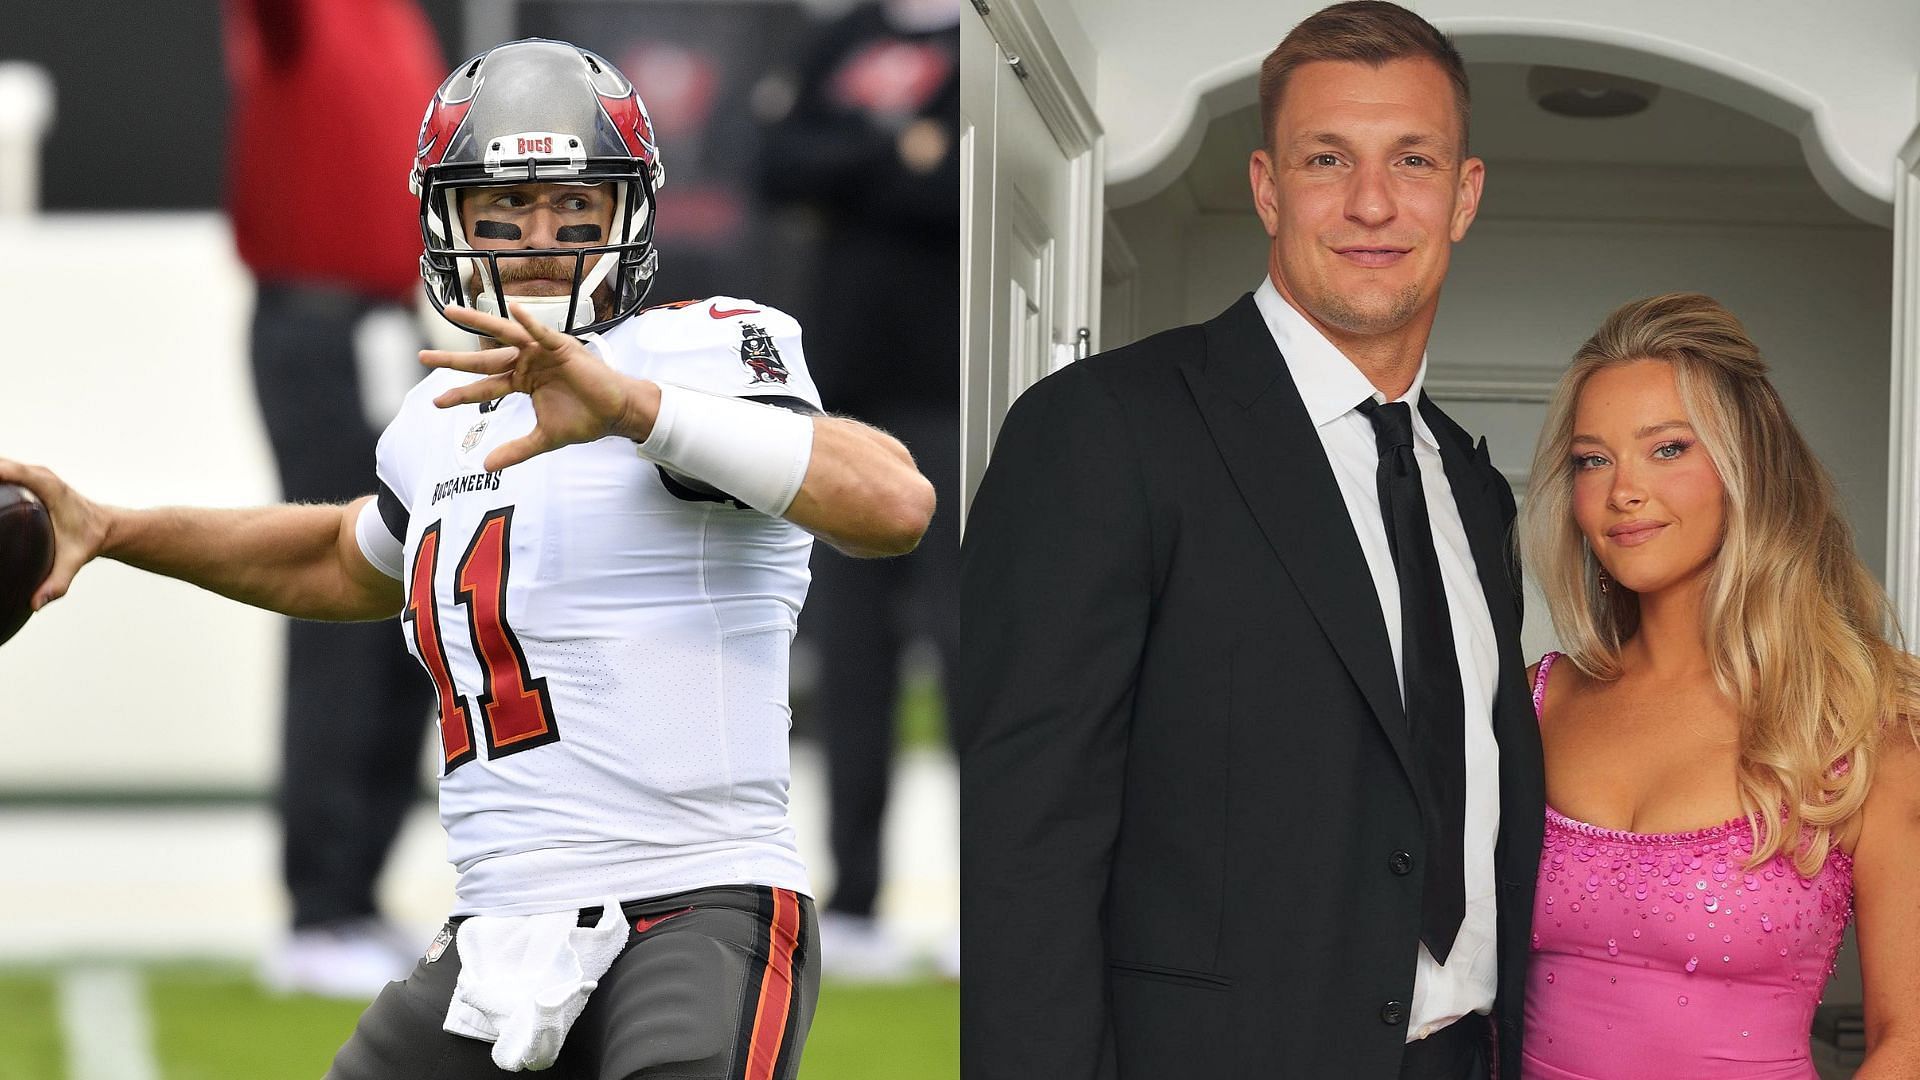 Camille Kostek and Rob Gronkowski cheer for Patrick Mahomes